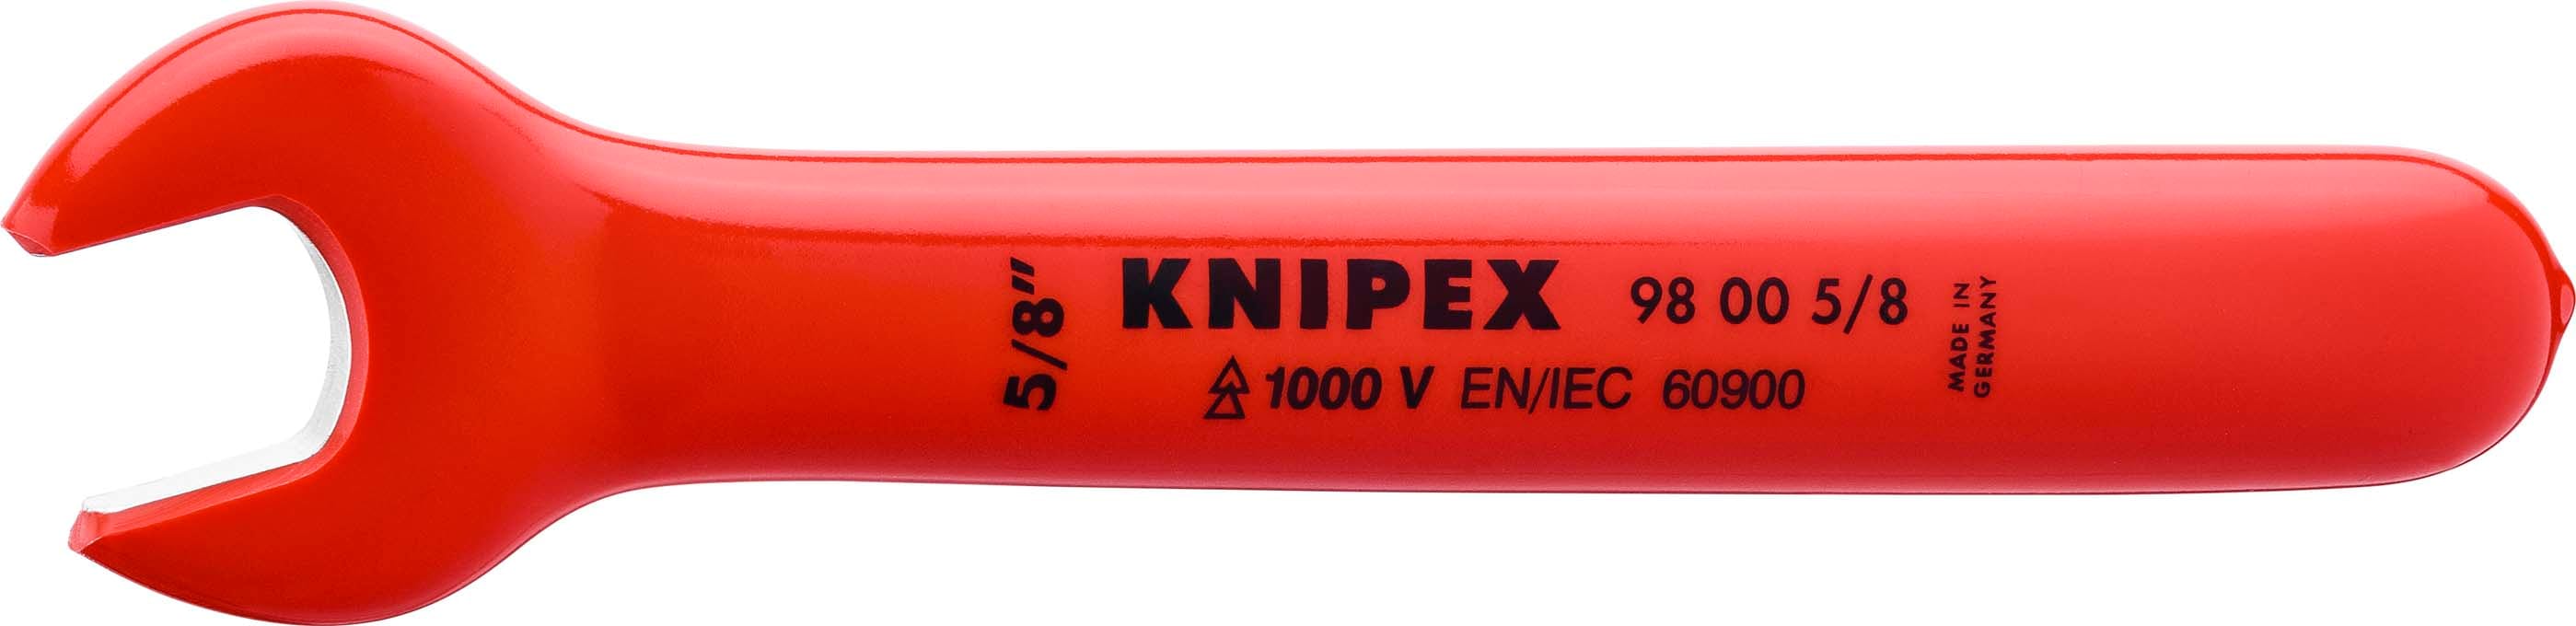 KNIPEX - Cle a fourche - 5-8'' - Tete inclinee a 15 - Longueur 165mm - Isolee 1000V